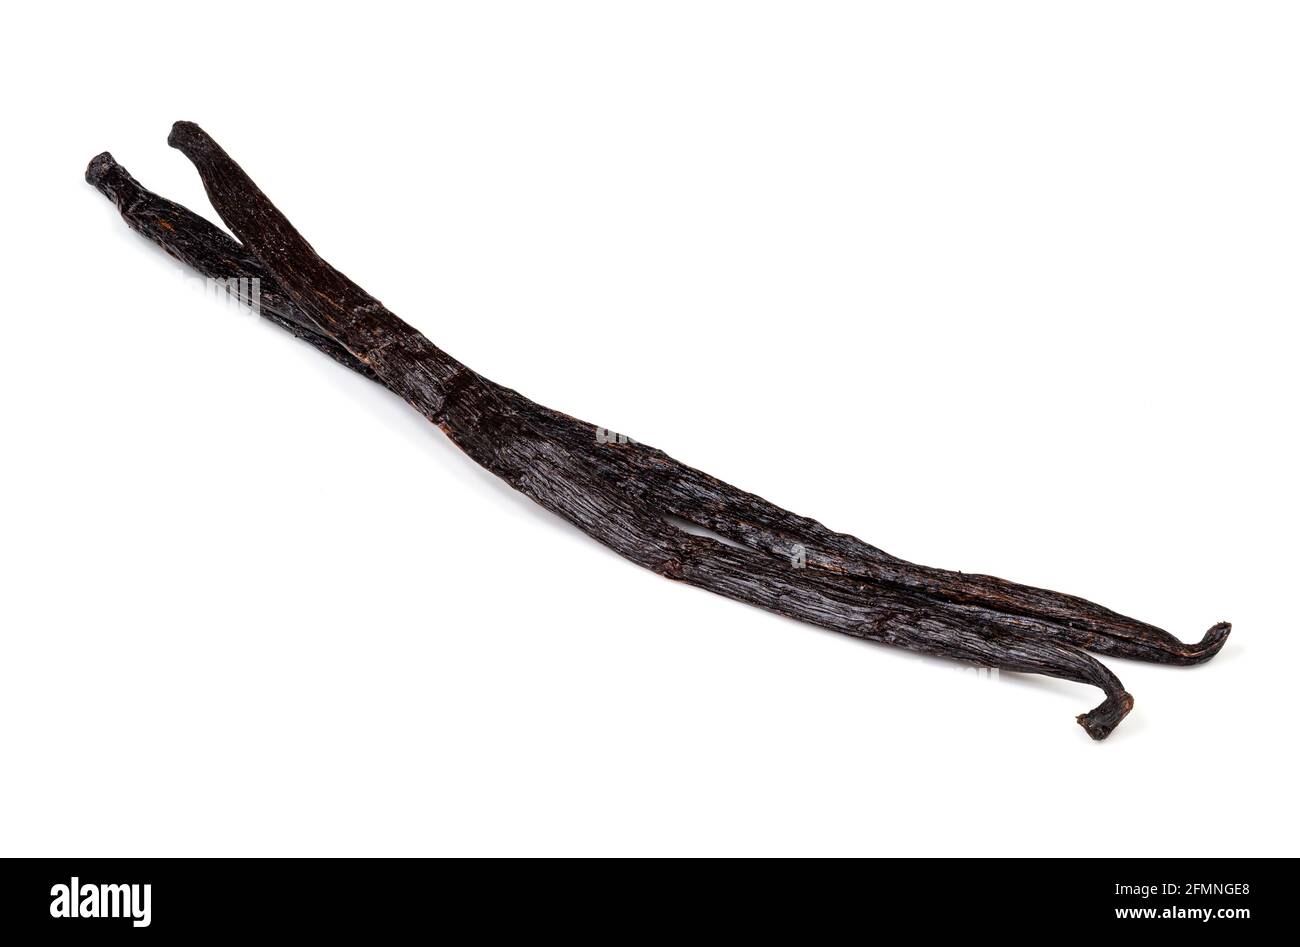 two different dried vanilla beans closeup on white background Stock Photo